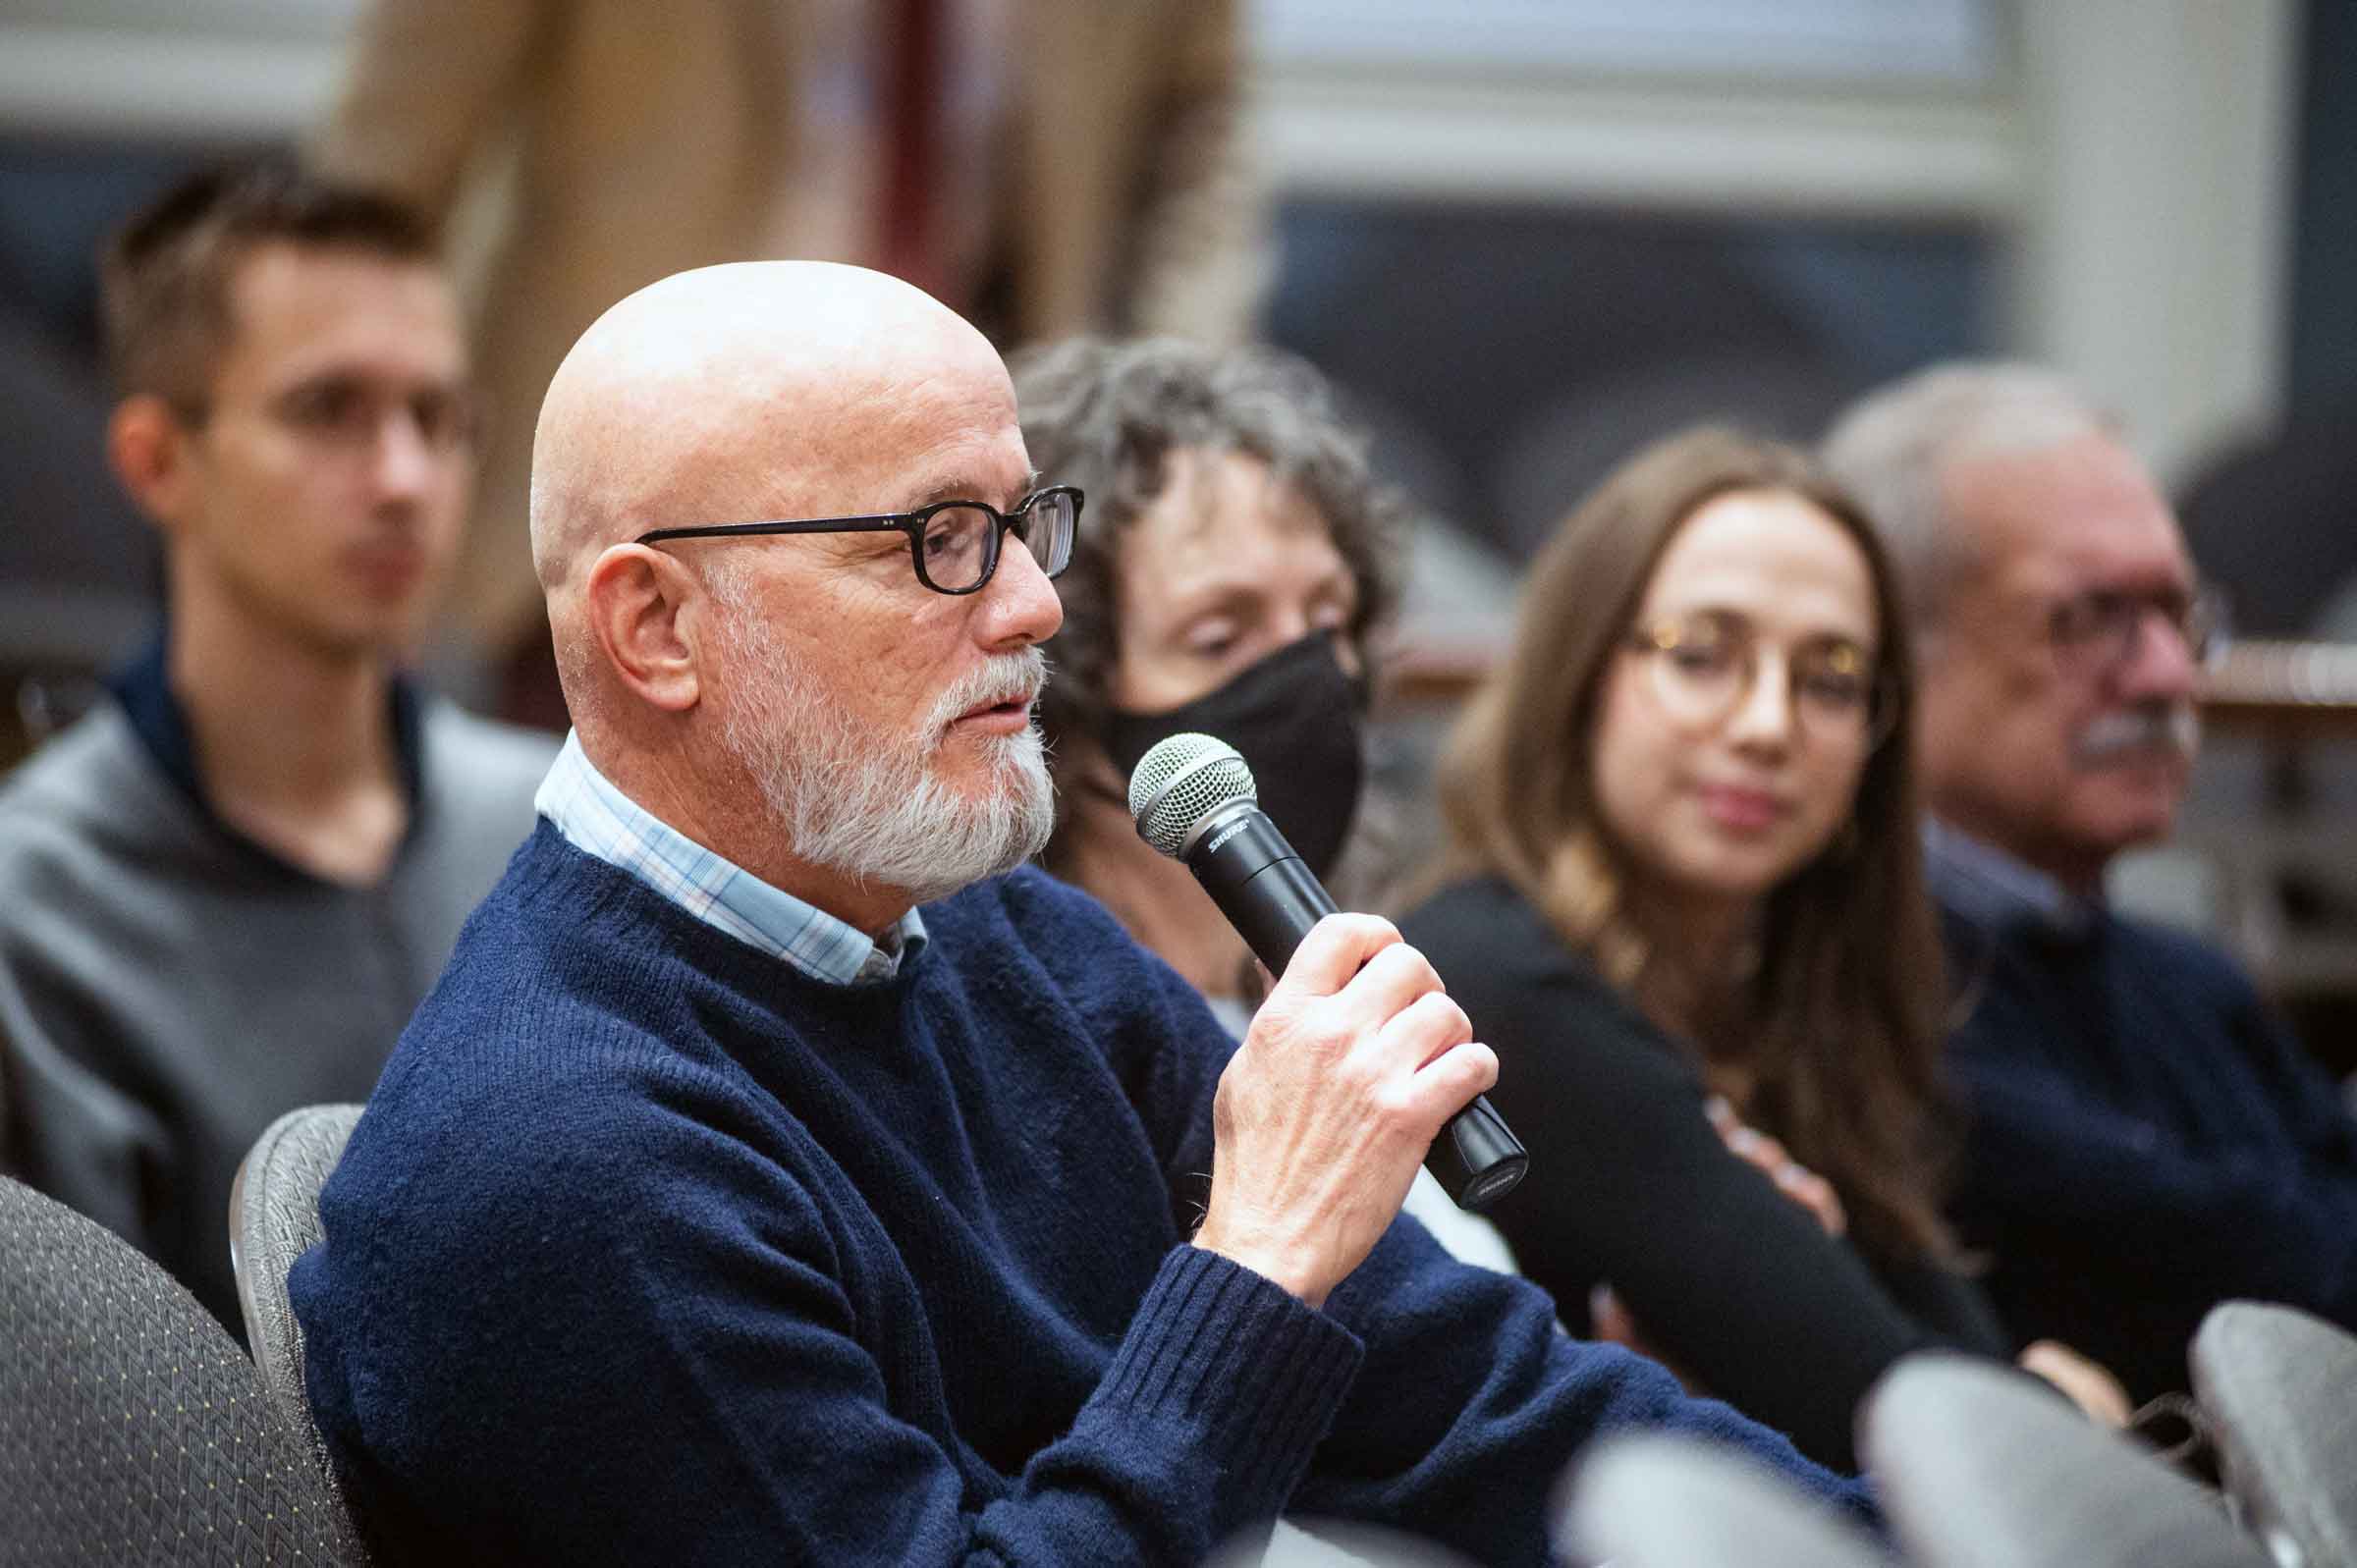 Seated person with a glasses and a beard speaking into a microphone while others in the background watch and listen.